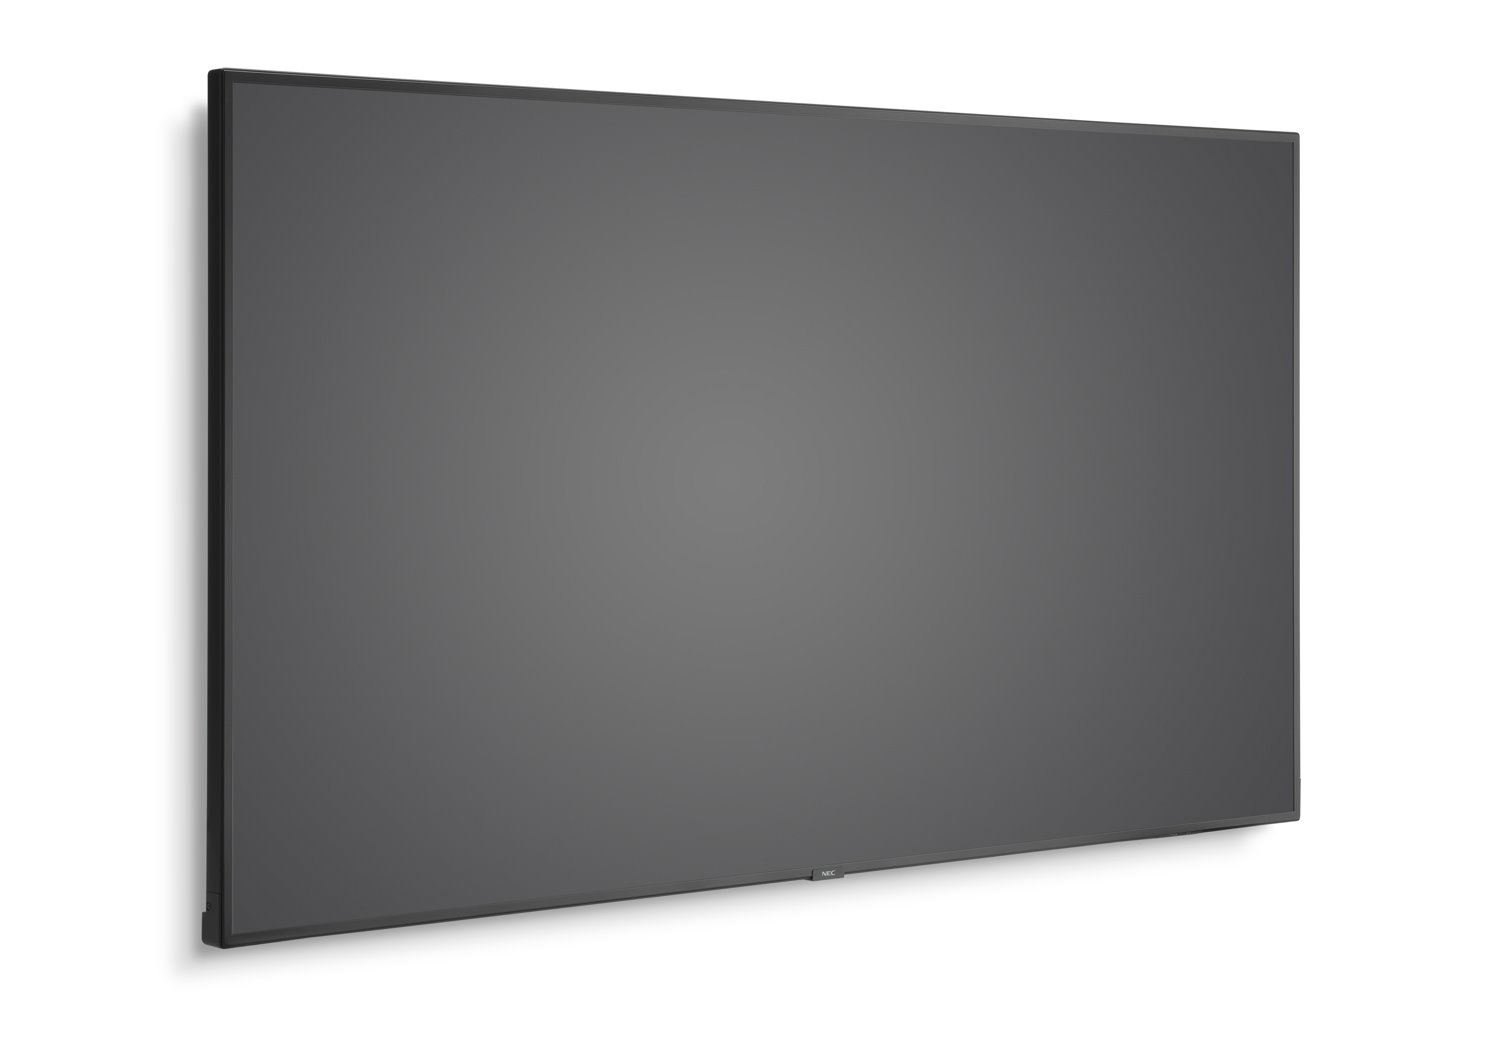 NEC Display 75" Ultra High Definition Professional Display